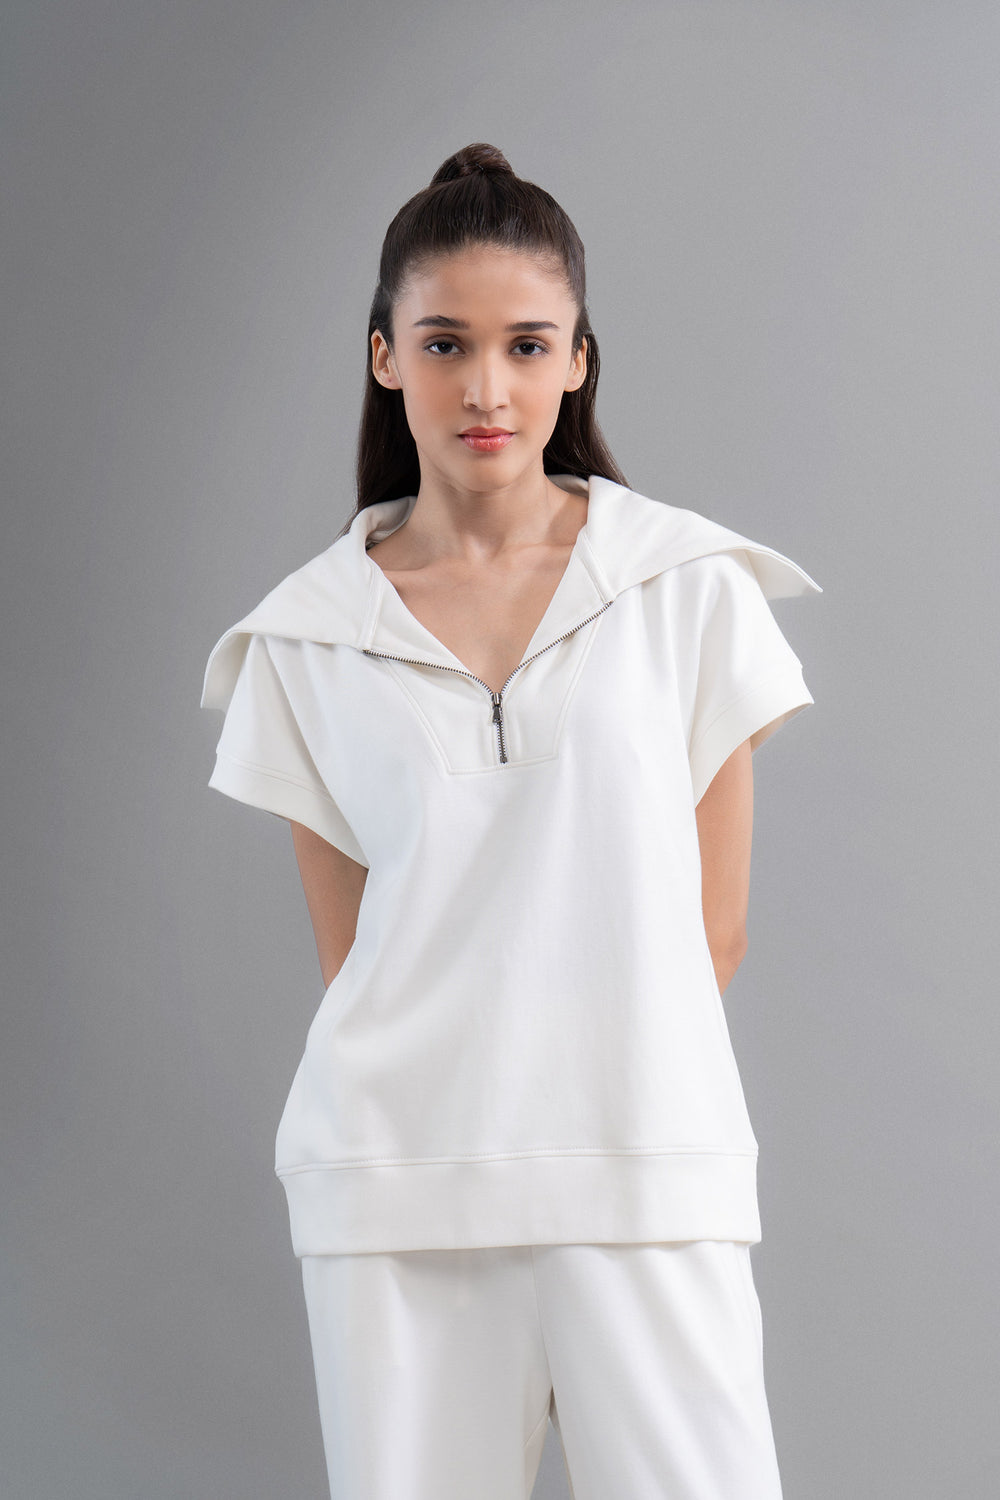 Snugknit® Ivory Polo Top